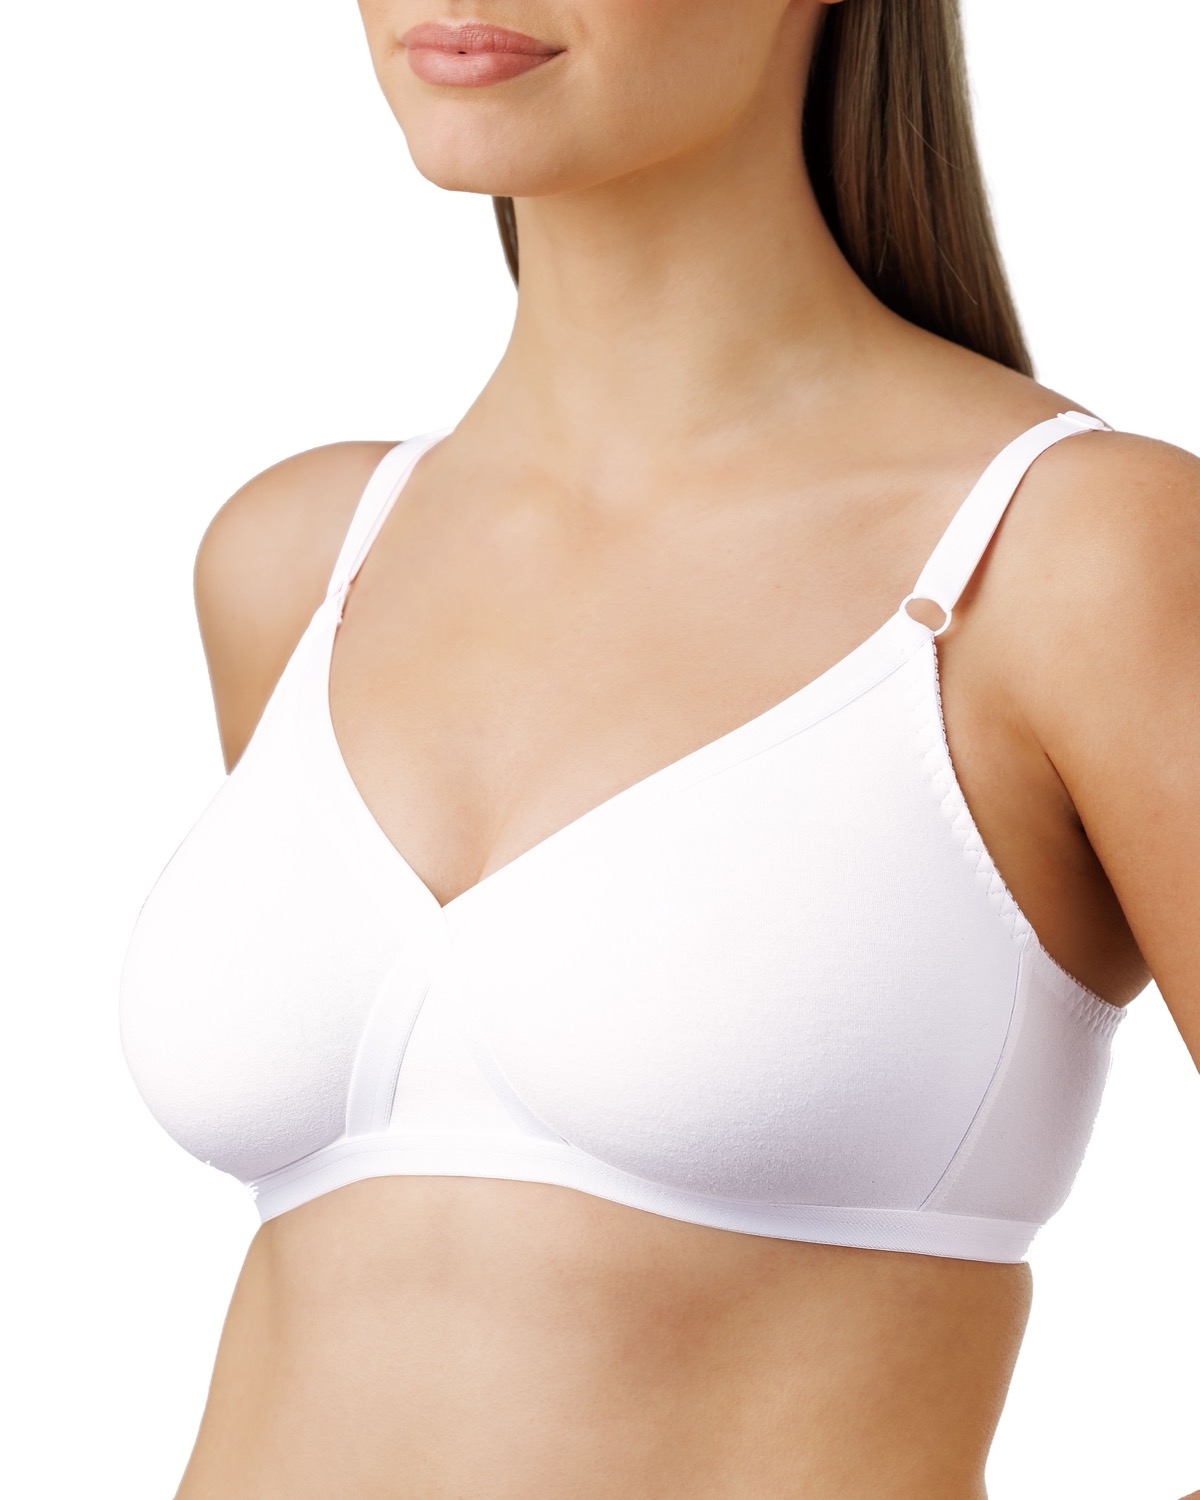 Womens Bras  Lingerie Outlet Store - Underwired & Non Wired Bras